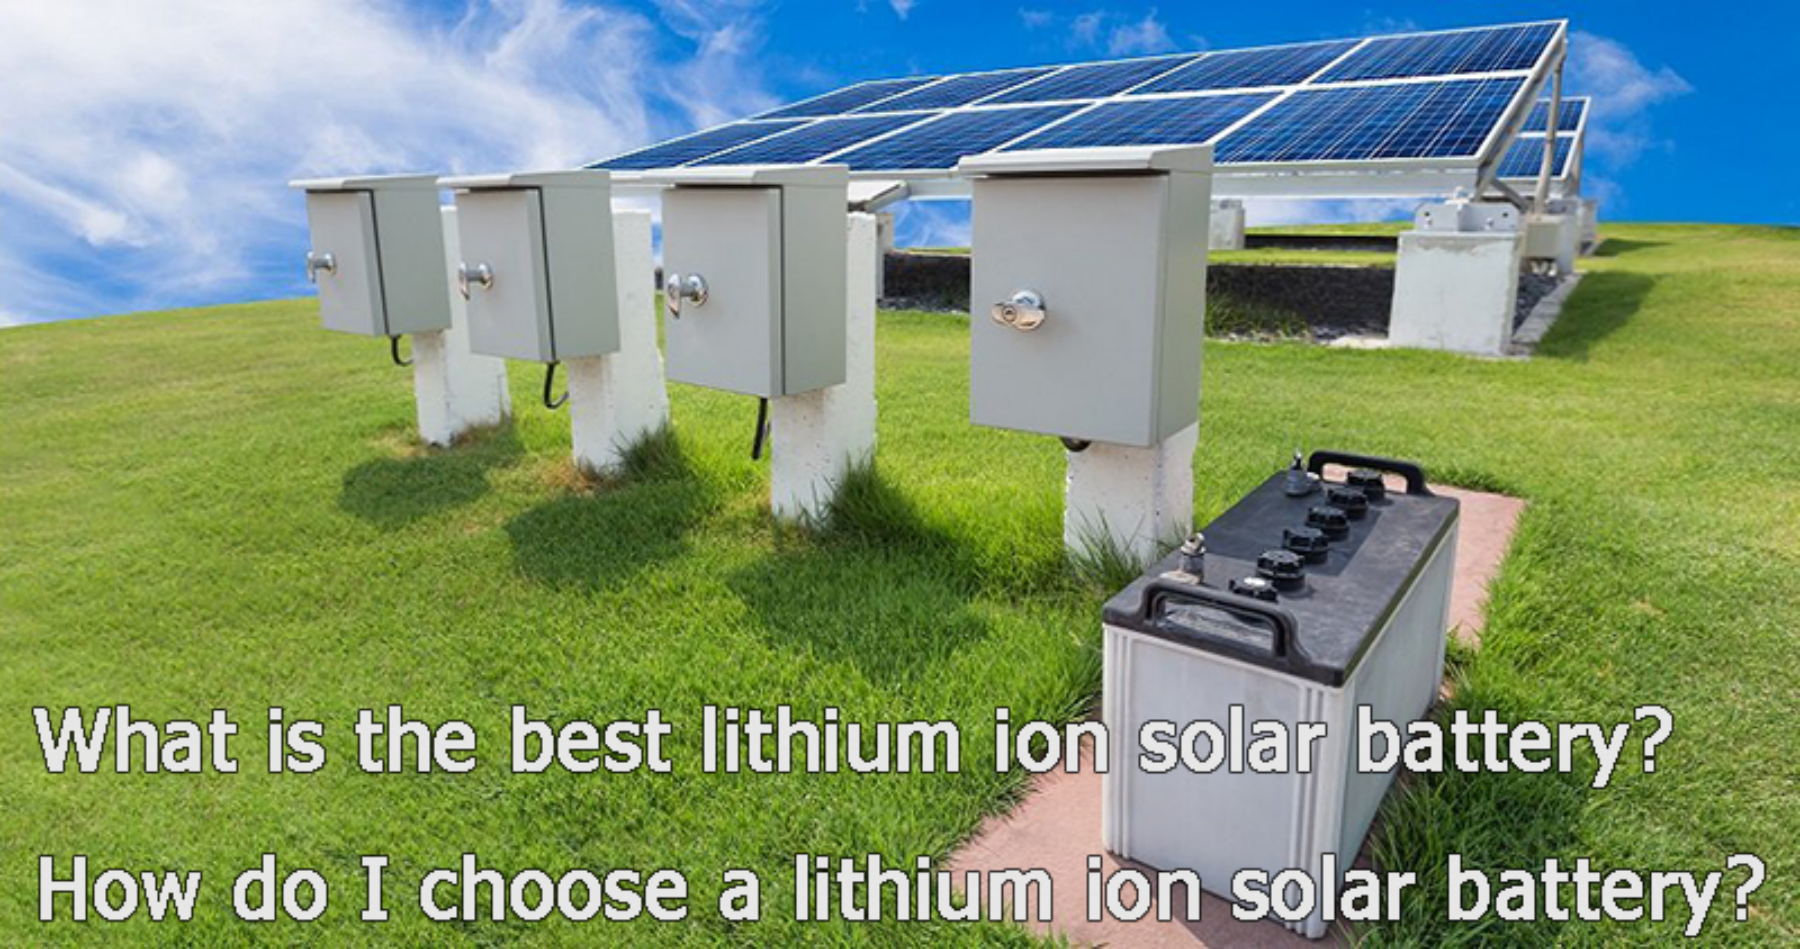 What is the best lithium ion solar batteryHow do I choose a lithium ion solar battery